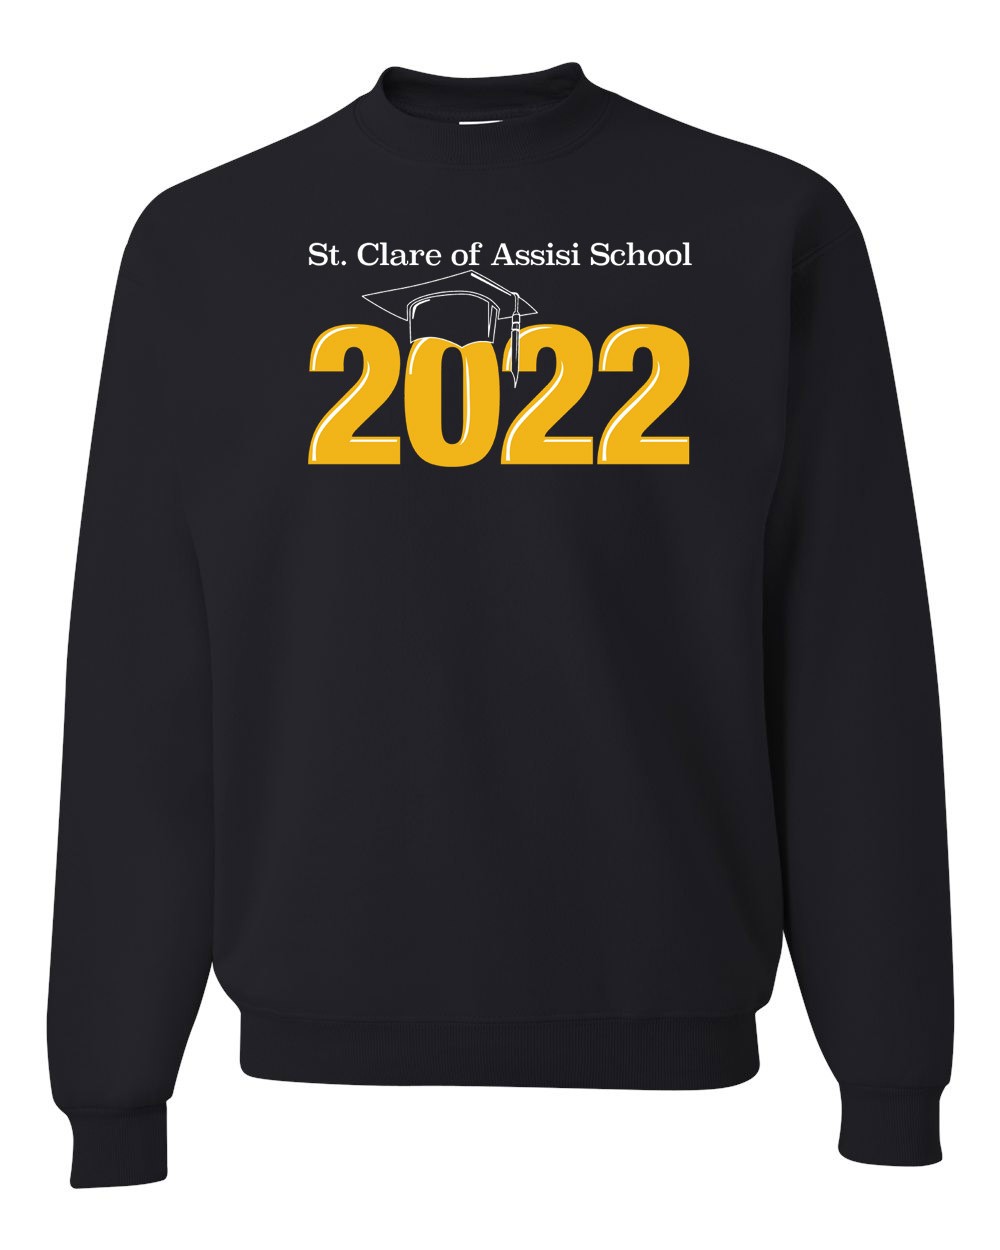 SCAS Class of 2022 Sweatshirt w/ Logo - Please Allow 2-3 Weeks for Delivery